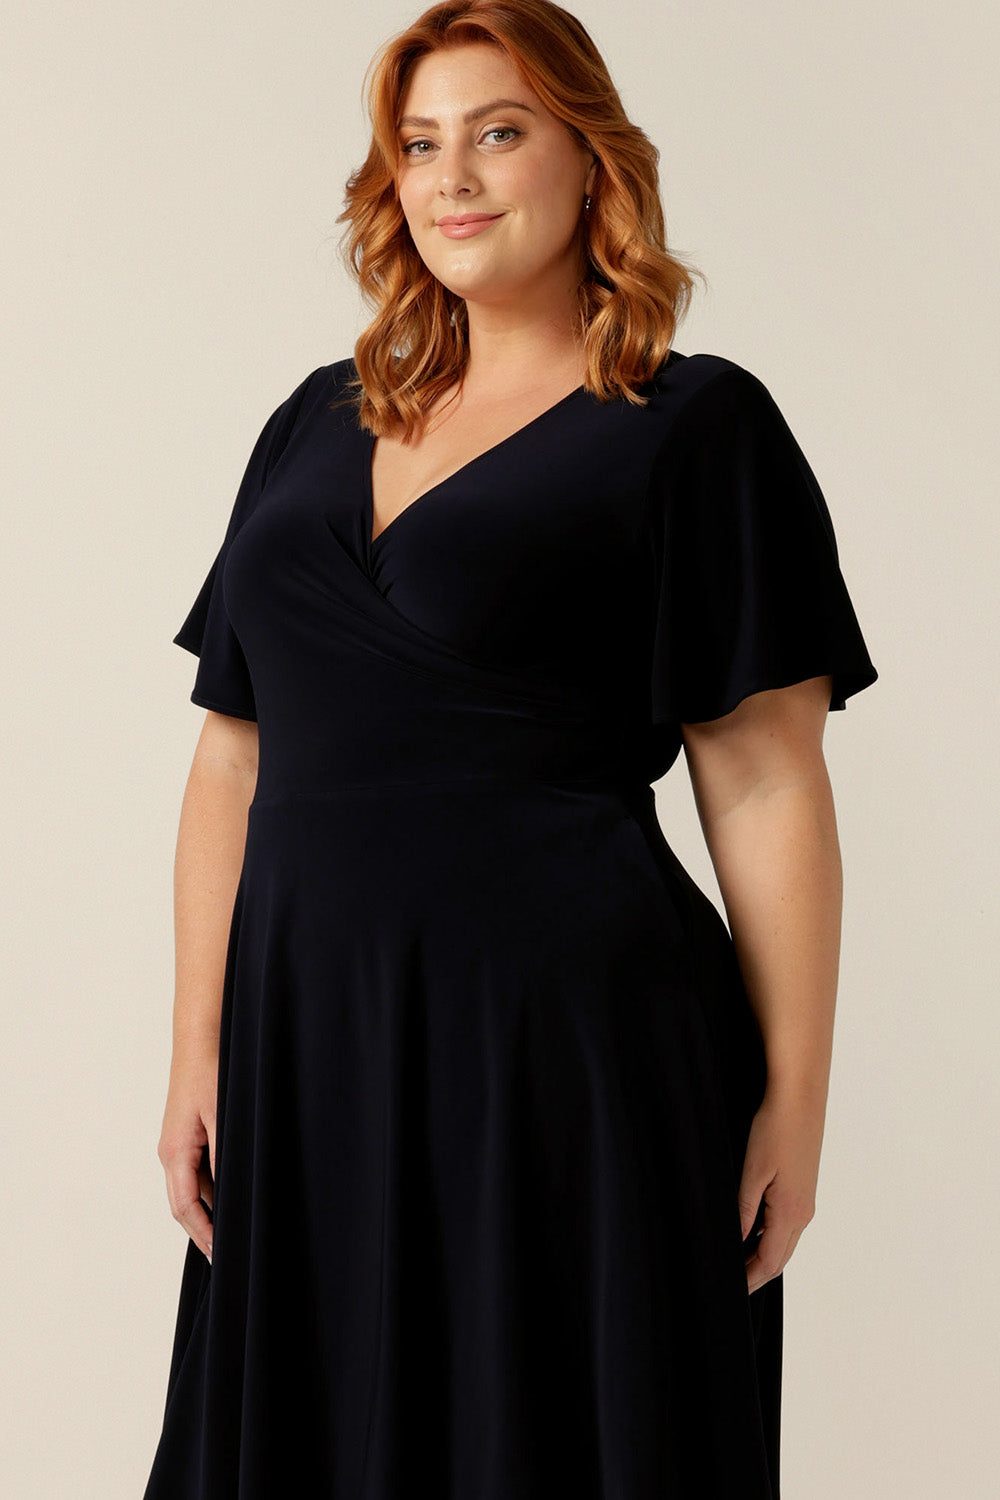 size 18, plus size woman wearing a reversible fixed wrap dress in navy jersey. The dress features flutter sleeves, knee length skirt and pockets. the reversible style of the dress allows her to be worn with a wrap front (as shown) or as a boat-neck dress. Designed as a work wear or evening dress, it is made in Australia for petite to plus sizes by women's clothing label, Leina and Fleur